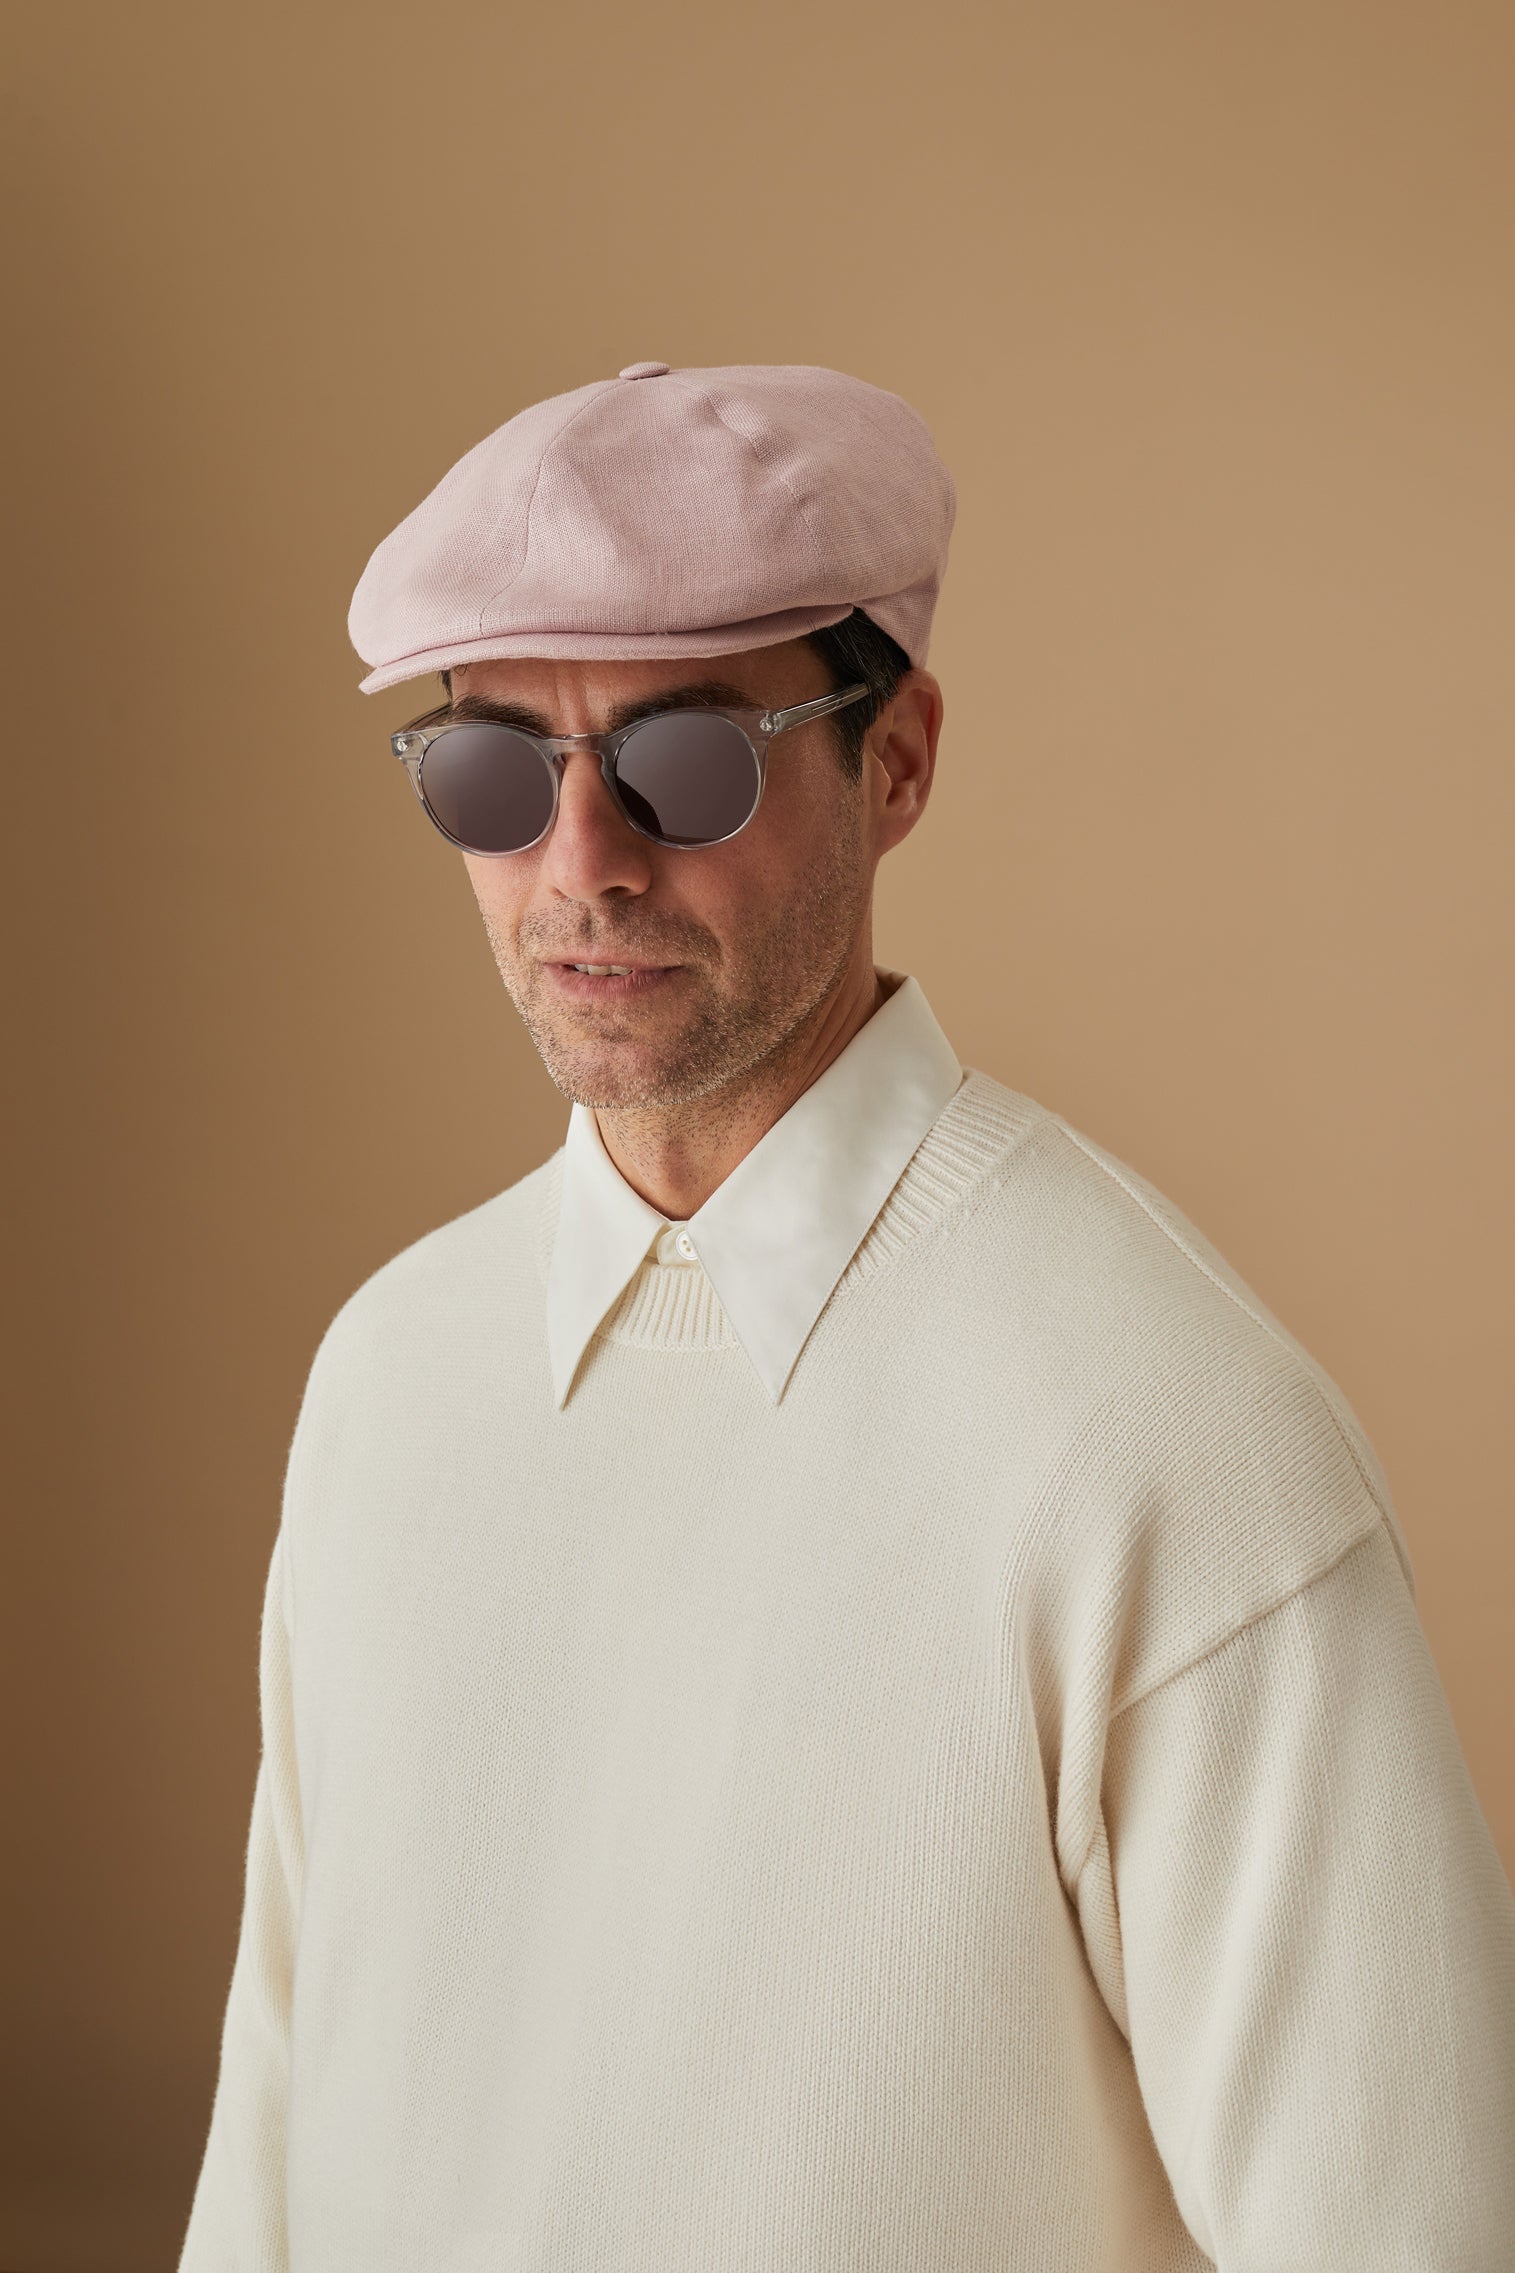 Tahoe Pink Bakerboy Cap - Hats for Tall People - Lock & Co. Hatters London UK